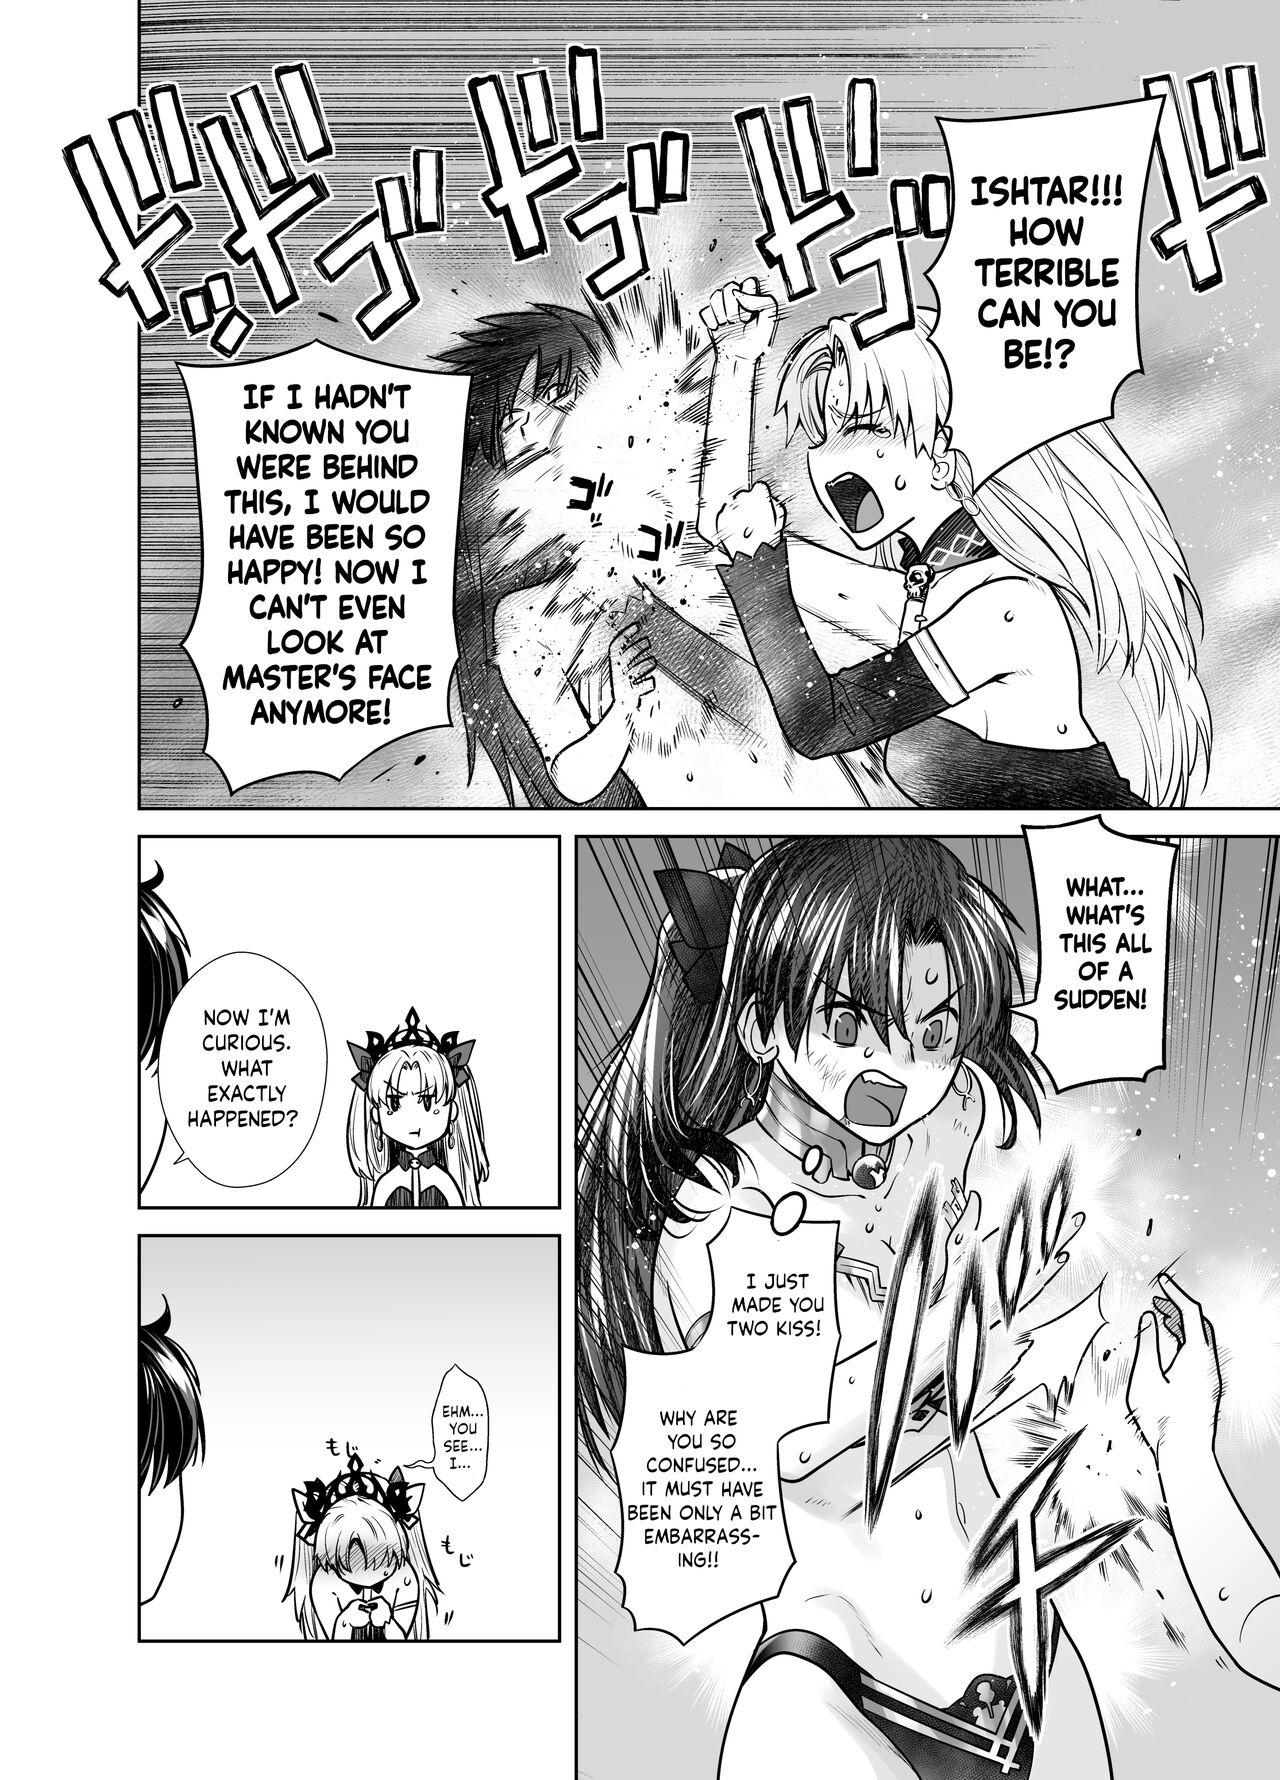 Titten HEAVEN'S DRIVE 10 - Fate grand order Awesome - Page 6